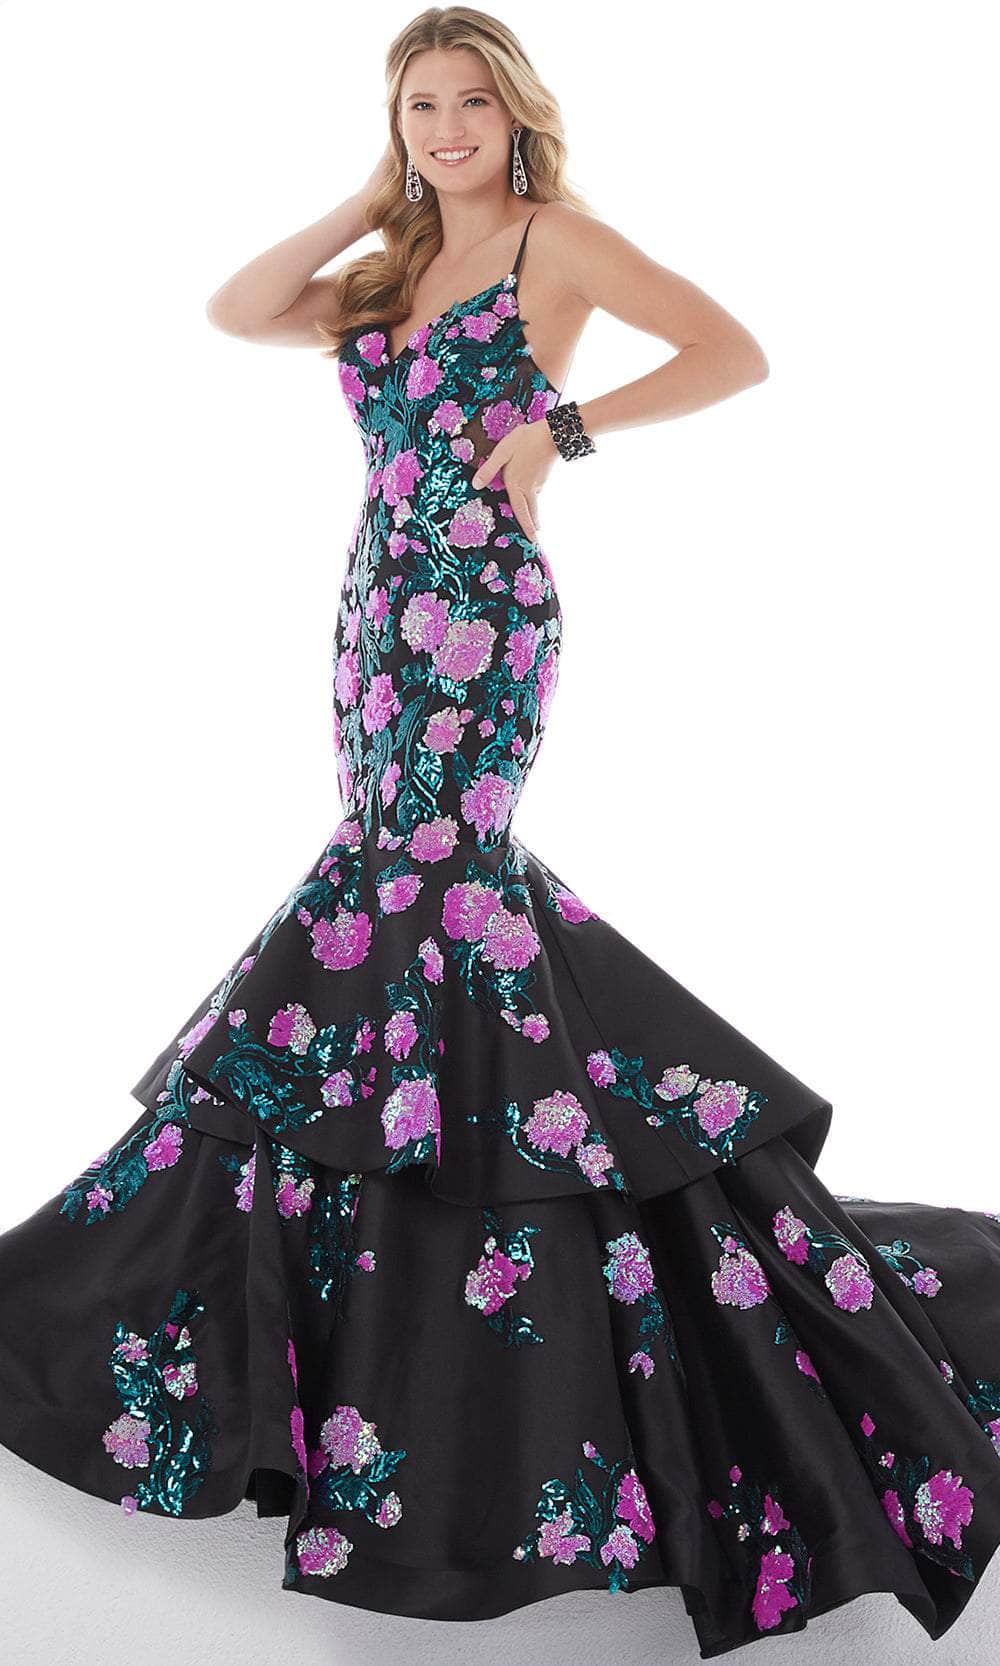 Panoply - 14095 Floral Sequin Tiered Gown
